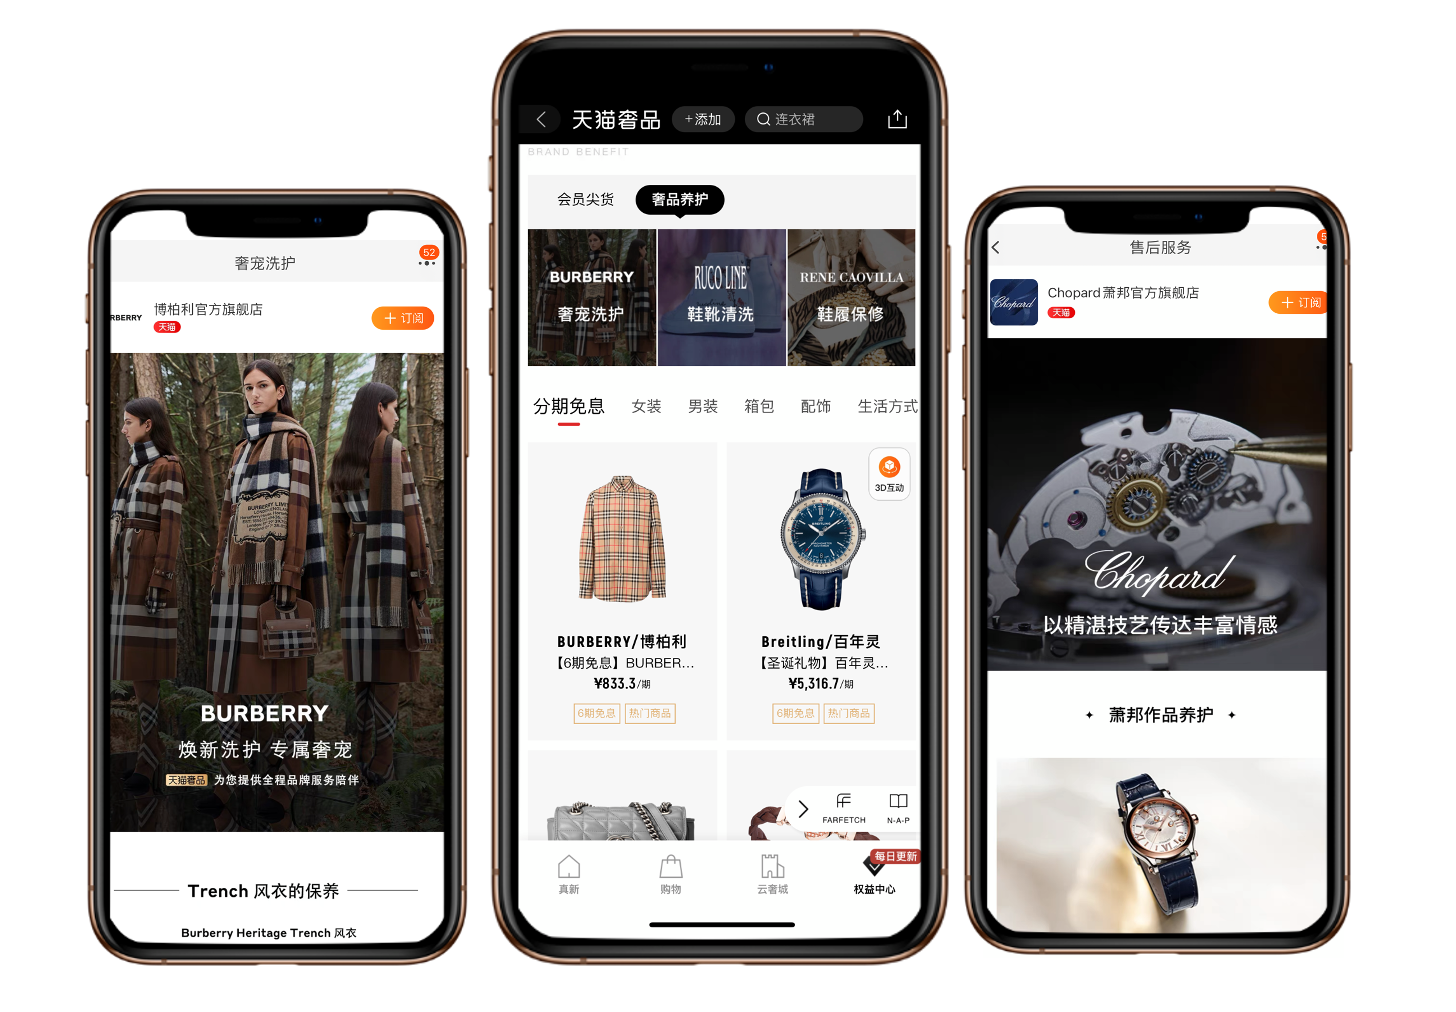 B2b free washing and care for door-to-door pickup, Burberry, GUCCI and other official after-sales services on Tmall